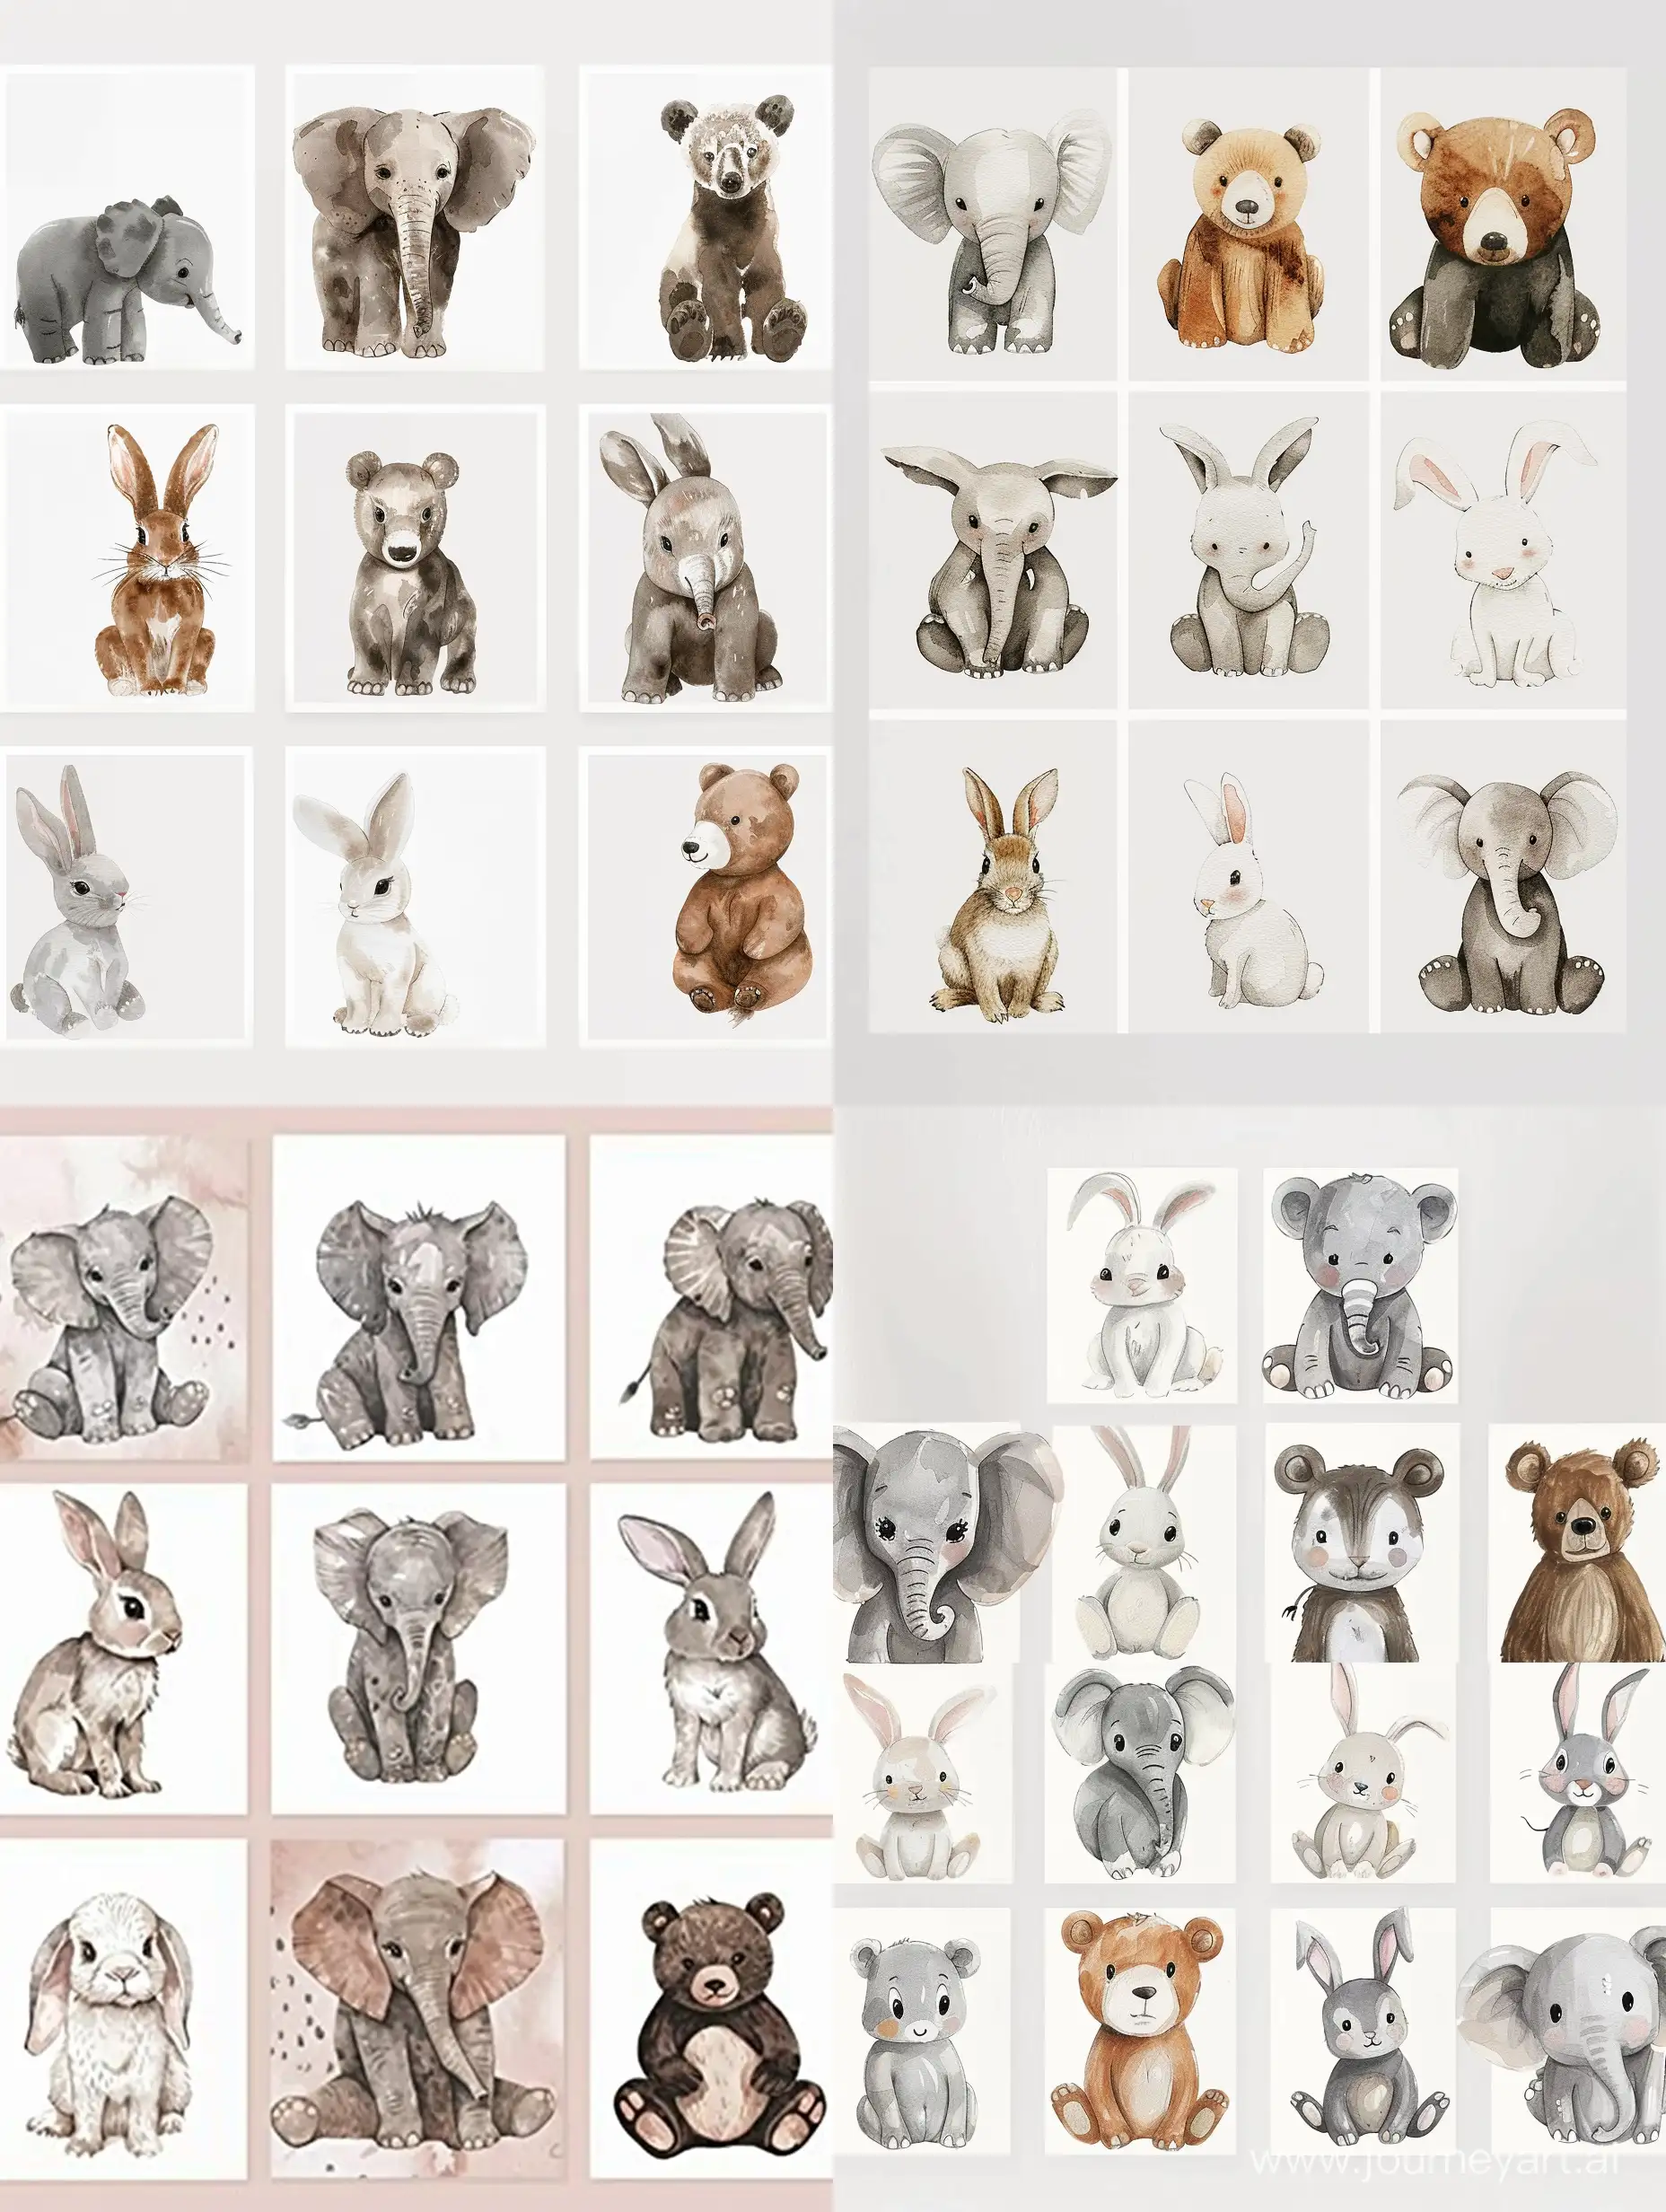 Design a set of adorable nursery wall art prints featuring hand-painted animals like elephants, rabbits, and bears in a minimalist style, perfect for creating a charming and playful atmosphere in the room.